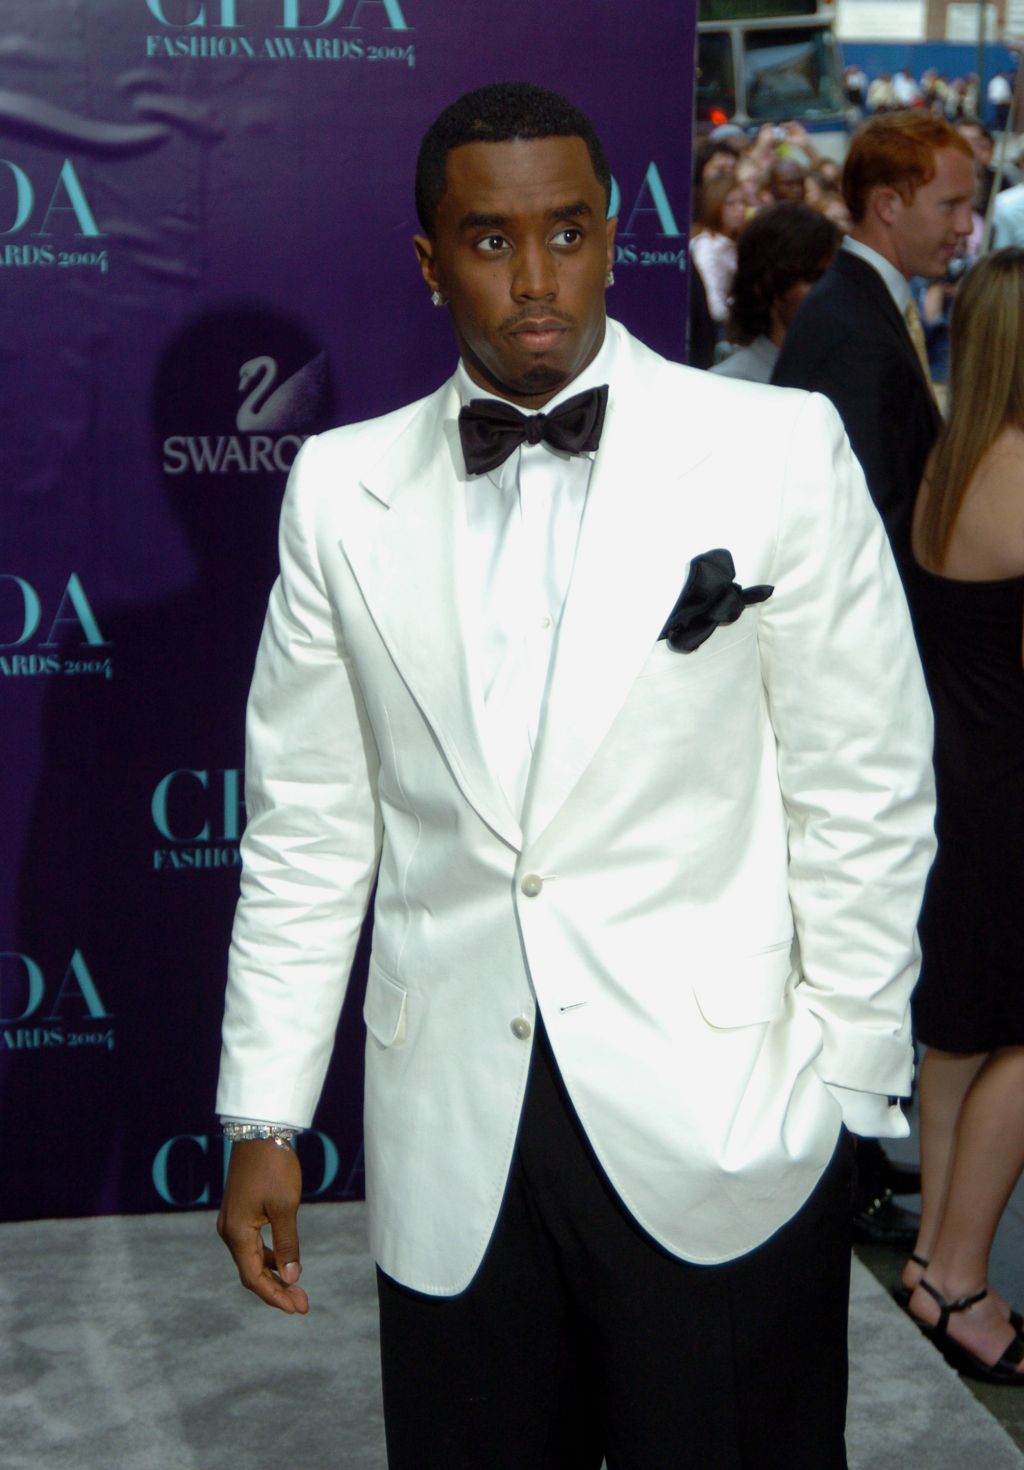 2004 CFDA Fashion Awards - Arrivals - Diddy